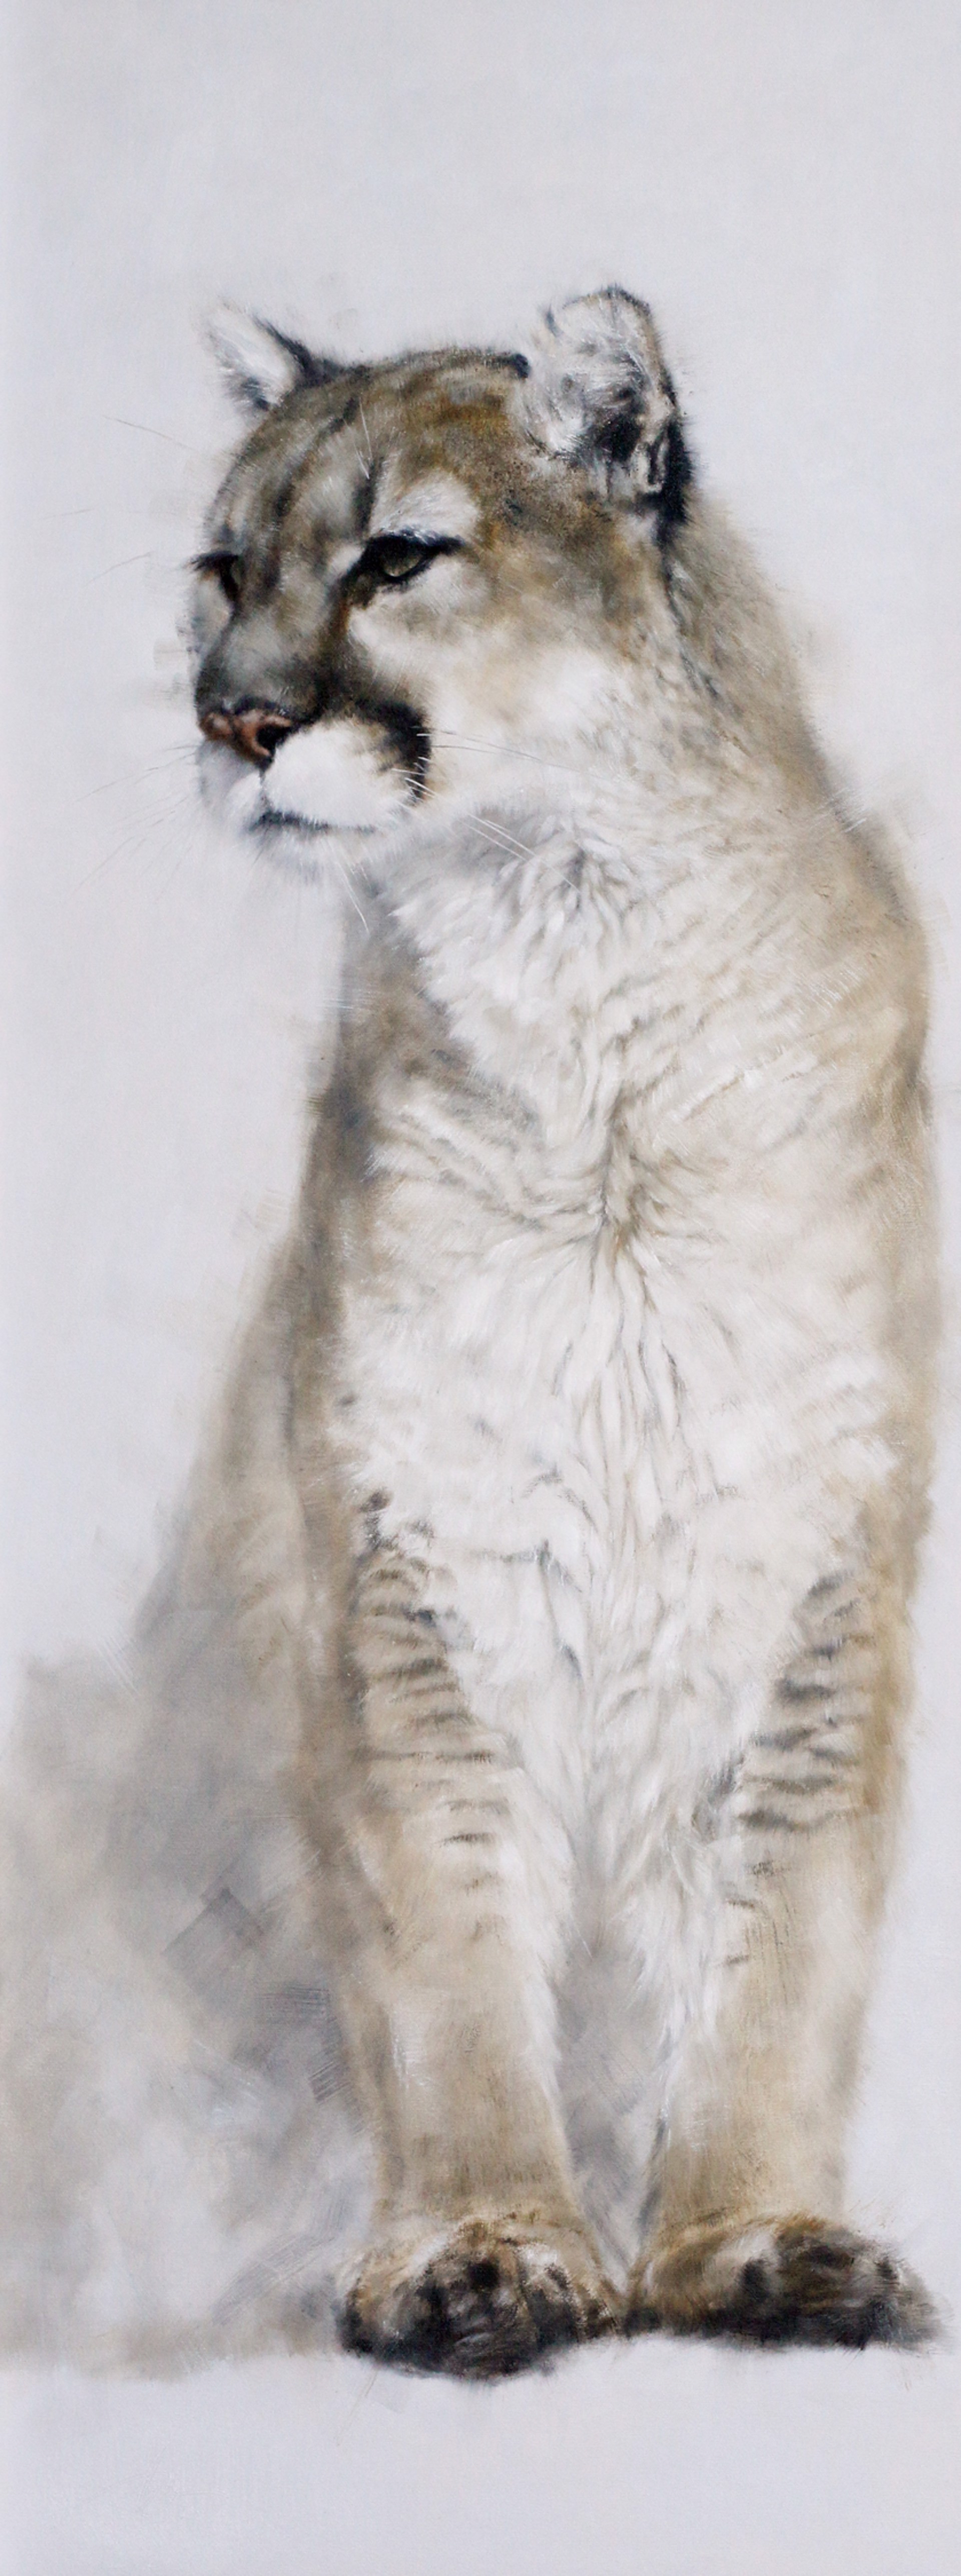 Original Oil Painting Featuring A Seated Cougar With Snowy White Background